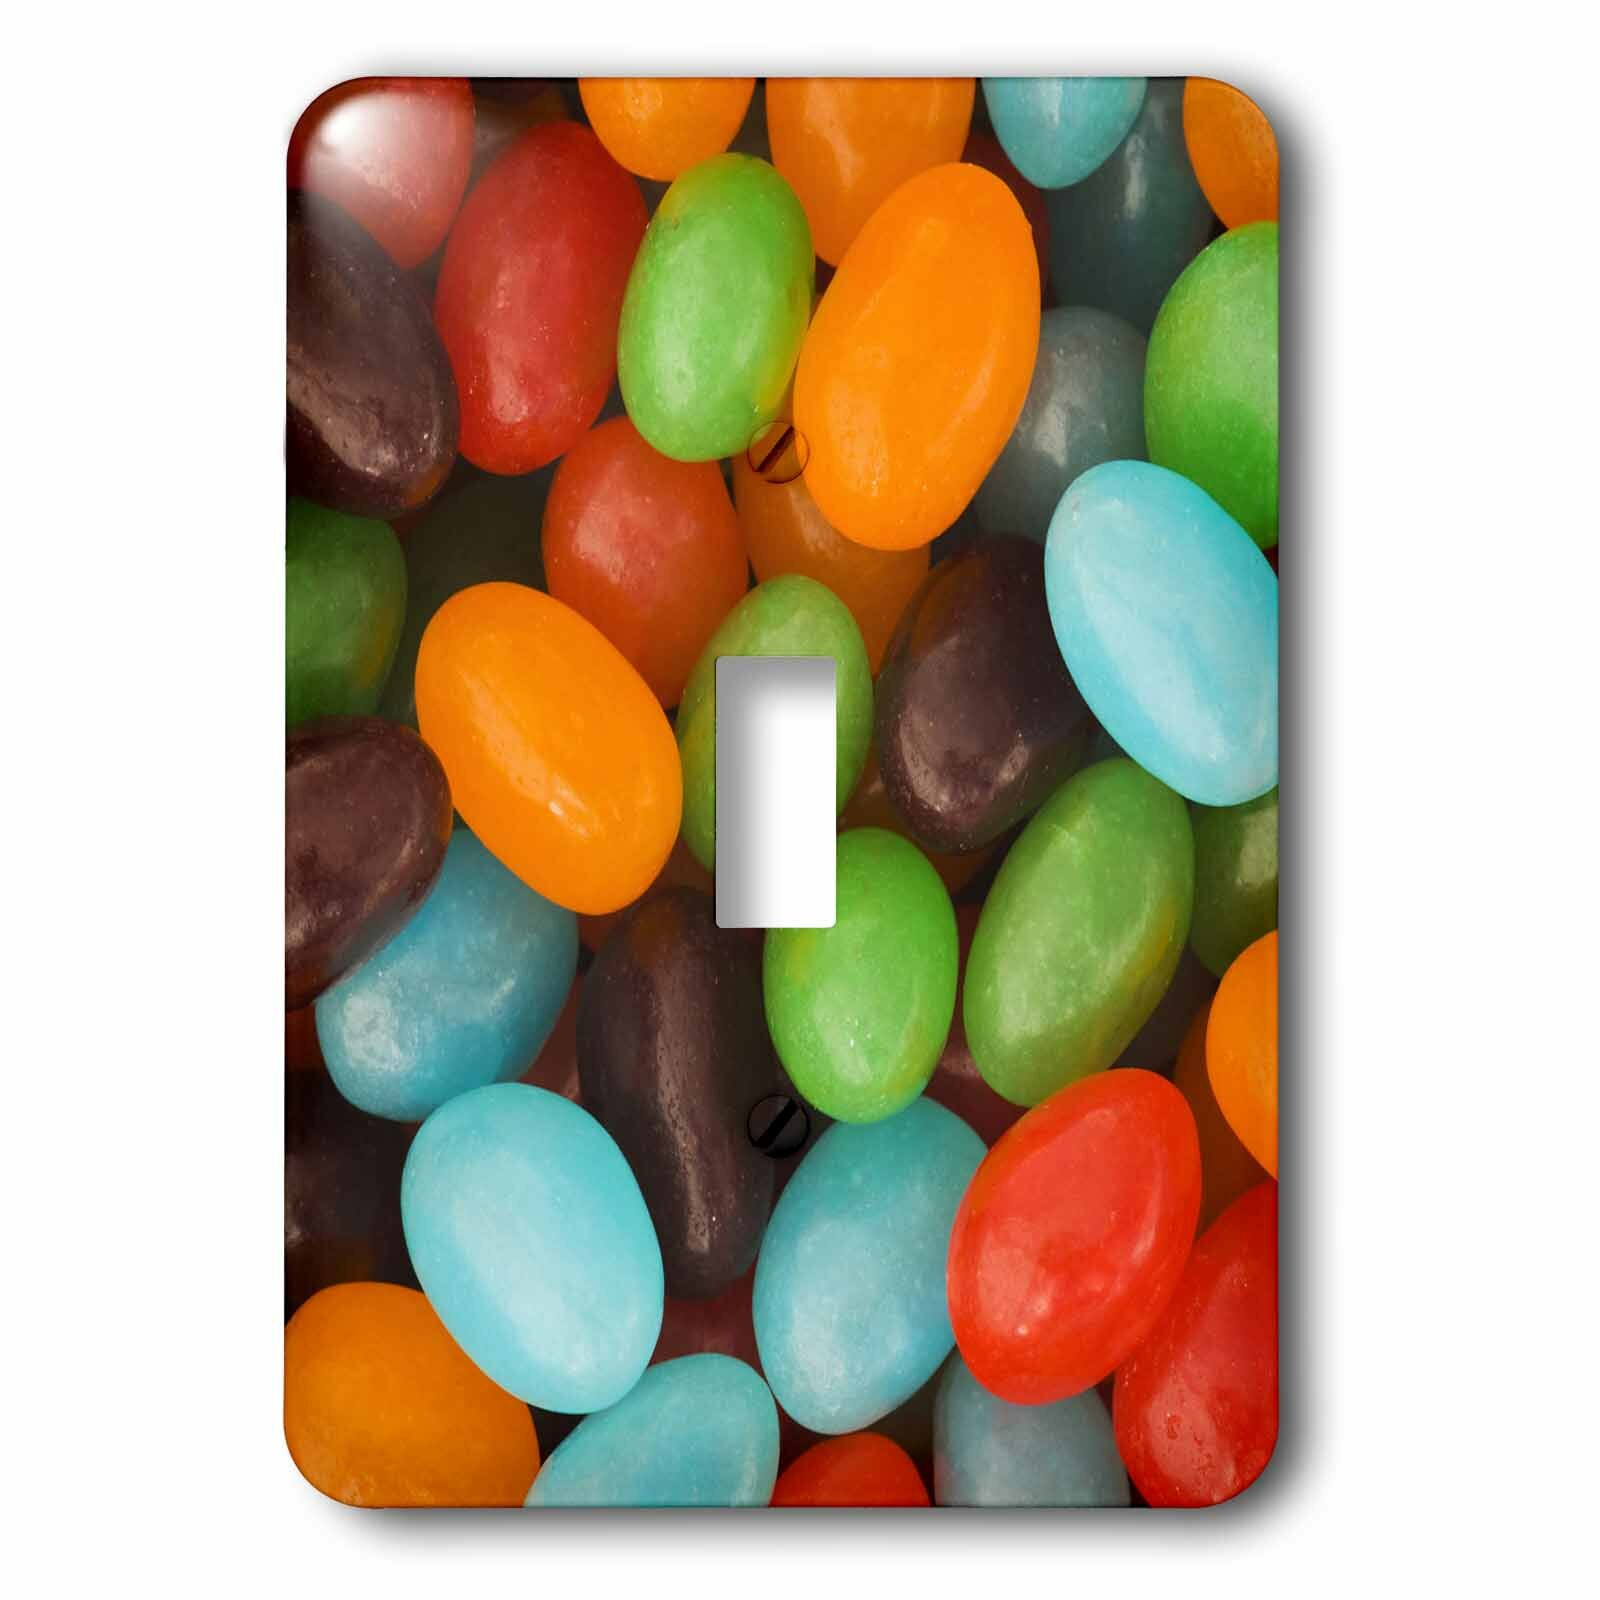 Sweets Li11 Bja0004 Jaynes Gallery Double Toggle Switch 3dRose lsp_83258_2 Colorful Assortment of Jelly Bean Candy 